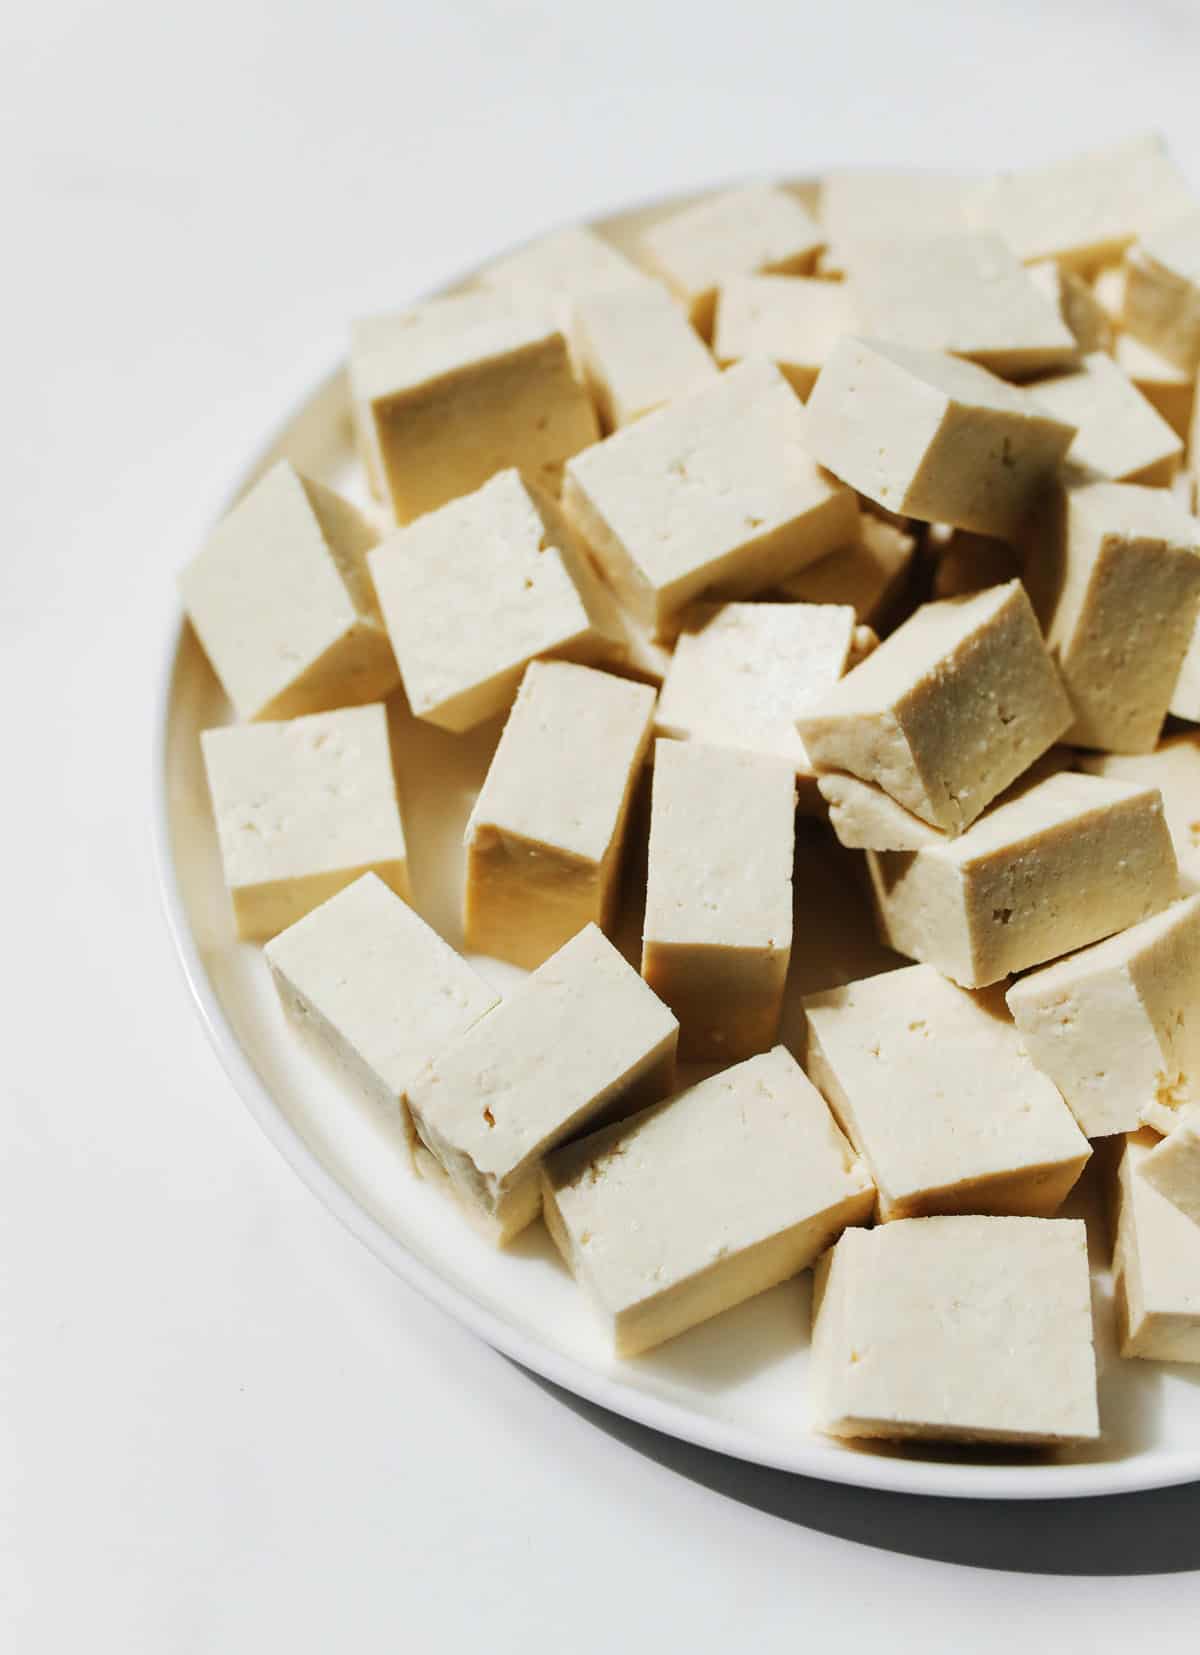 Plate of raw firm tofu cut into cubes